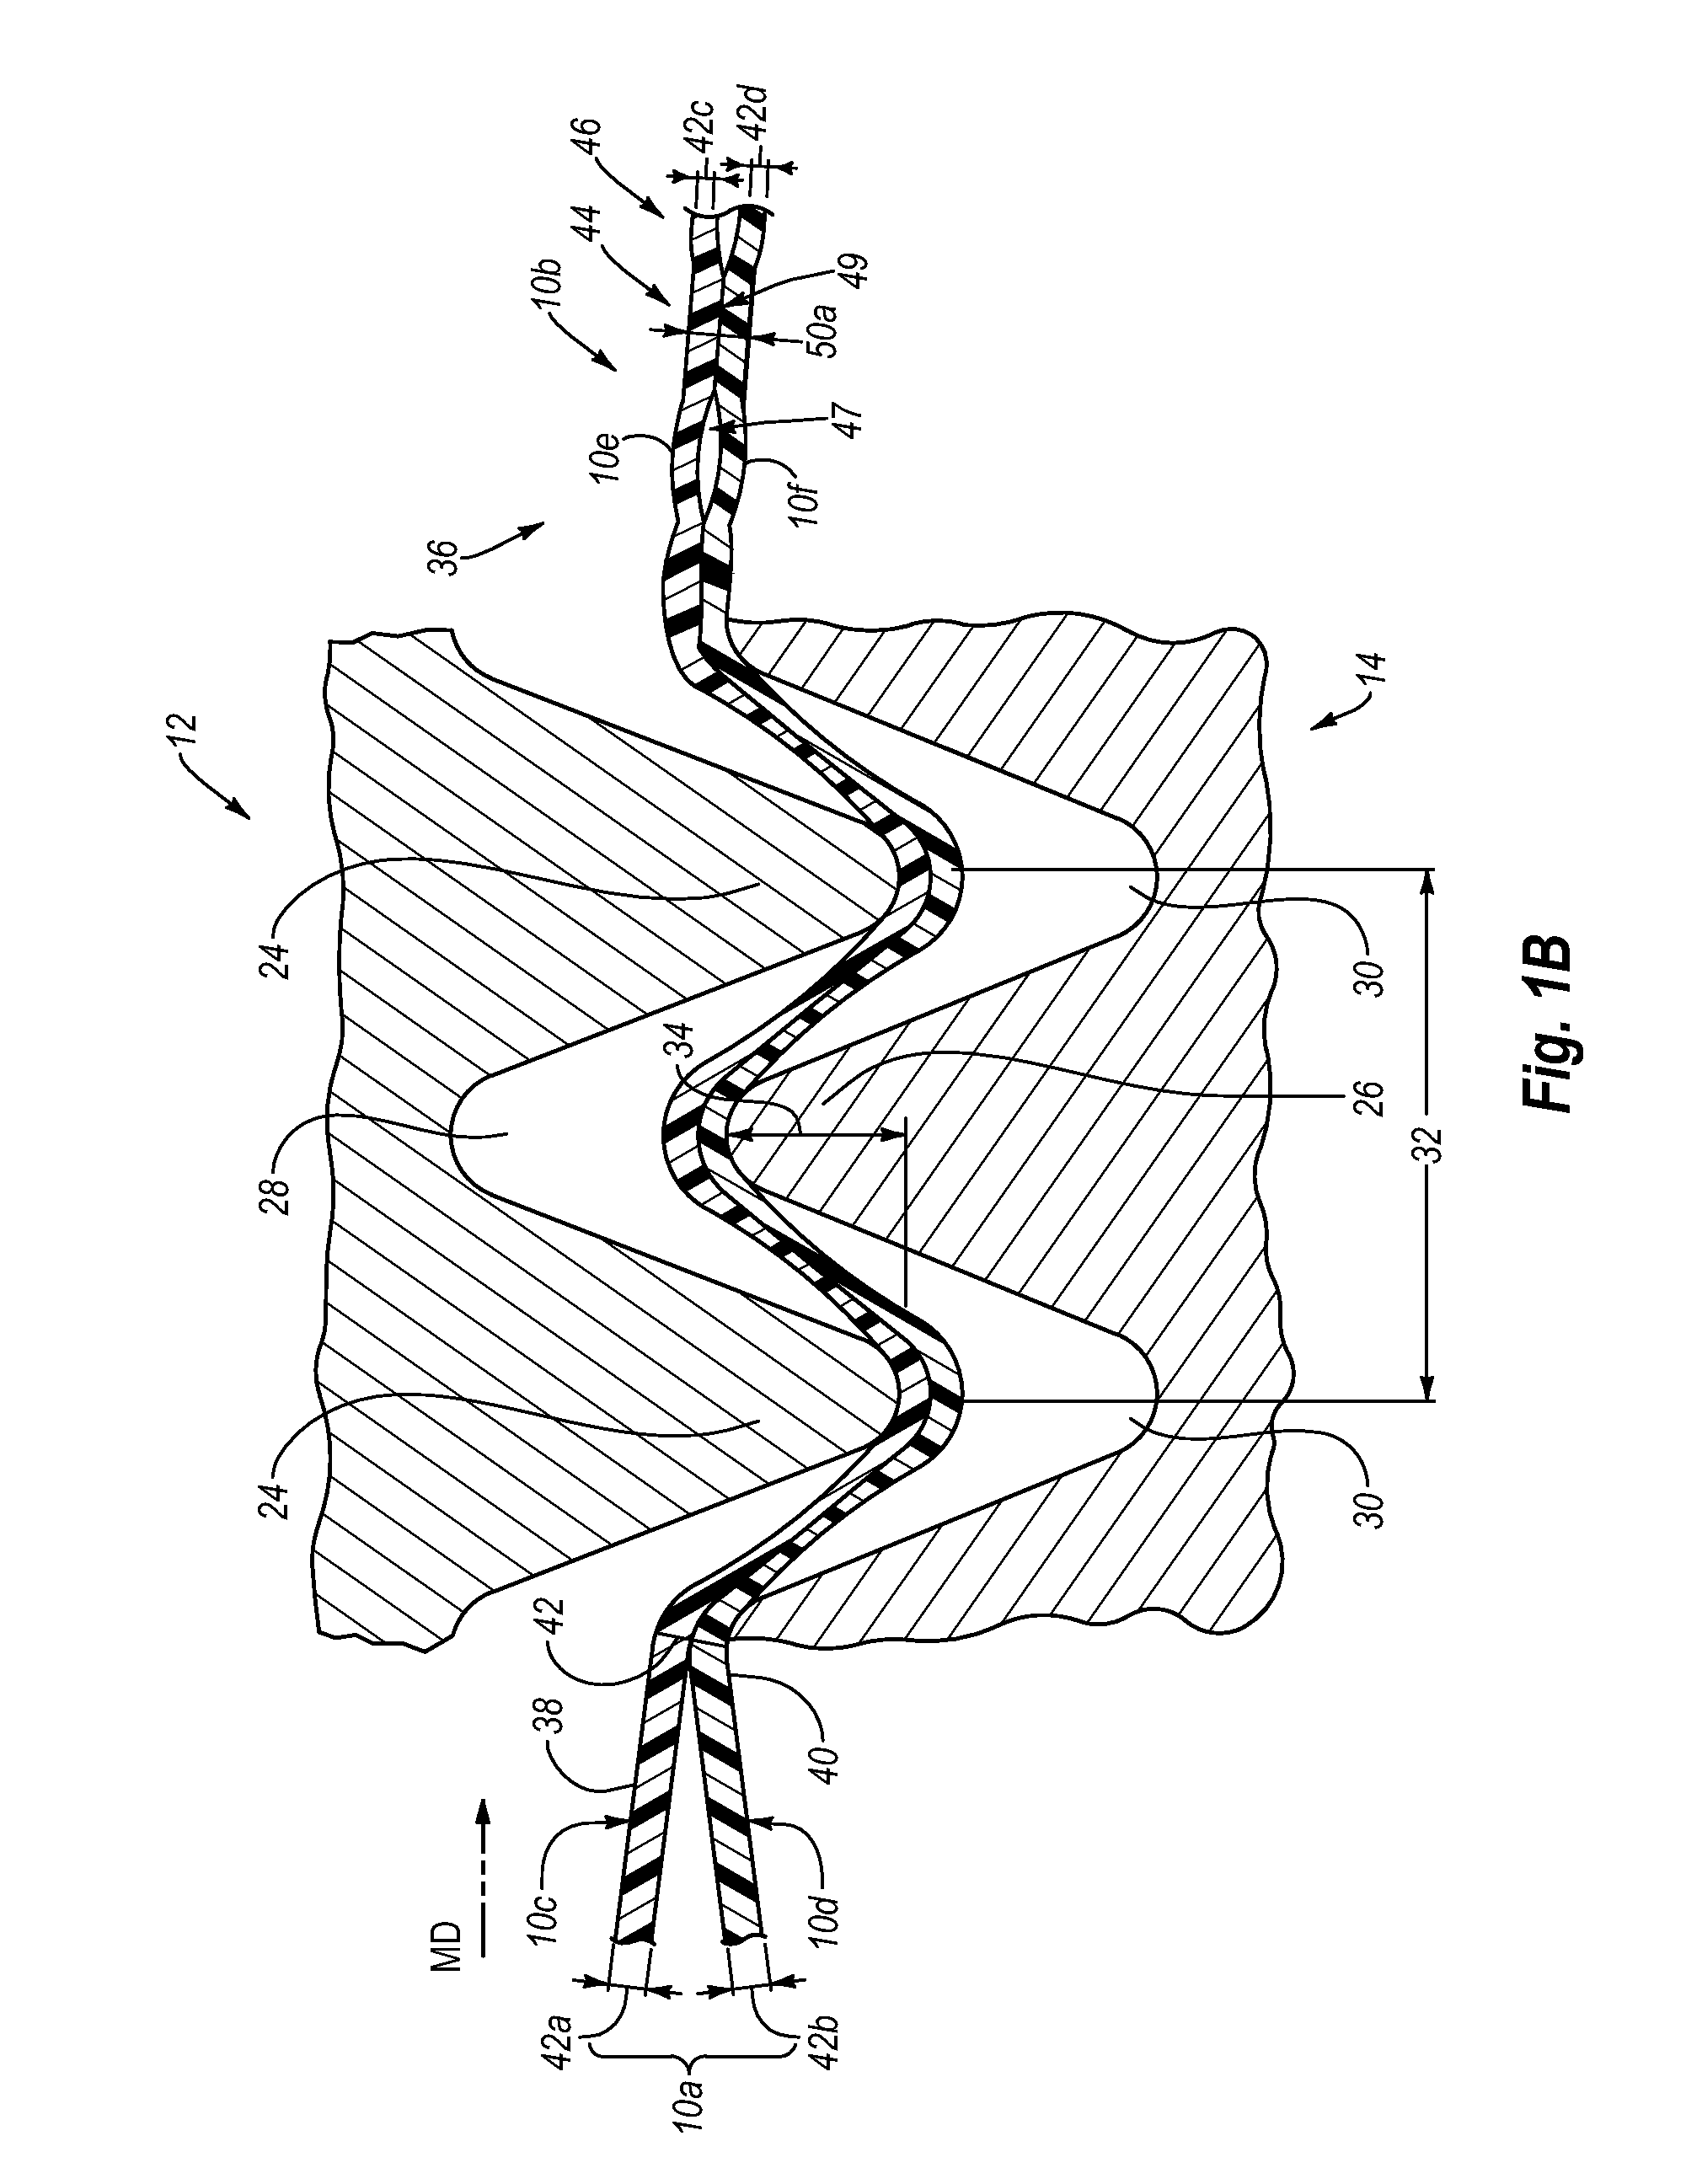 Methods of making multi-layered bags with enhanced properties